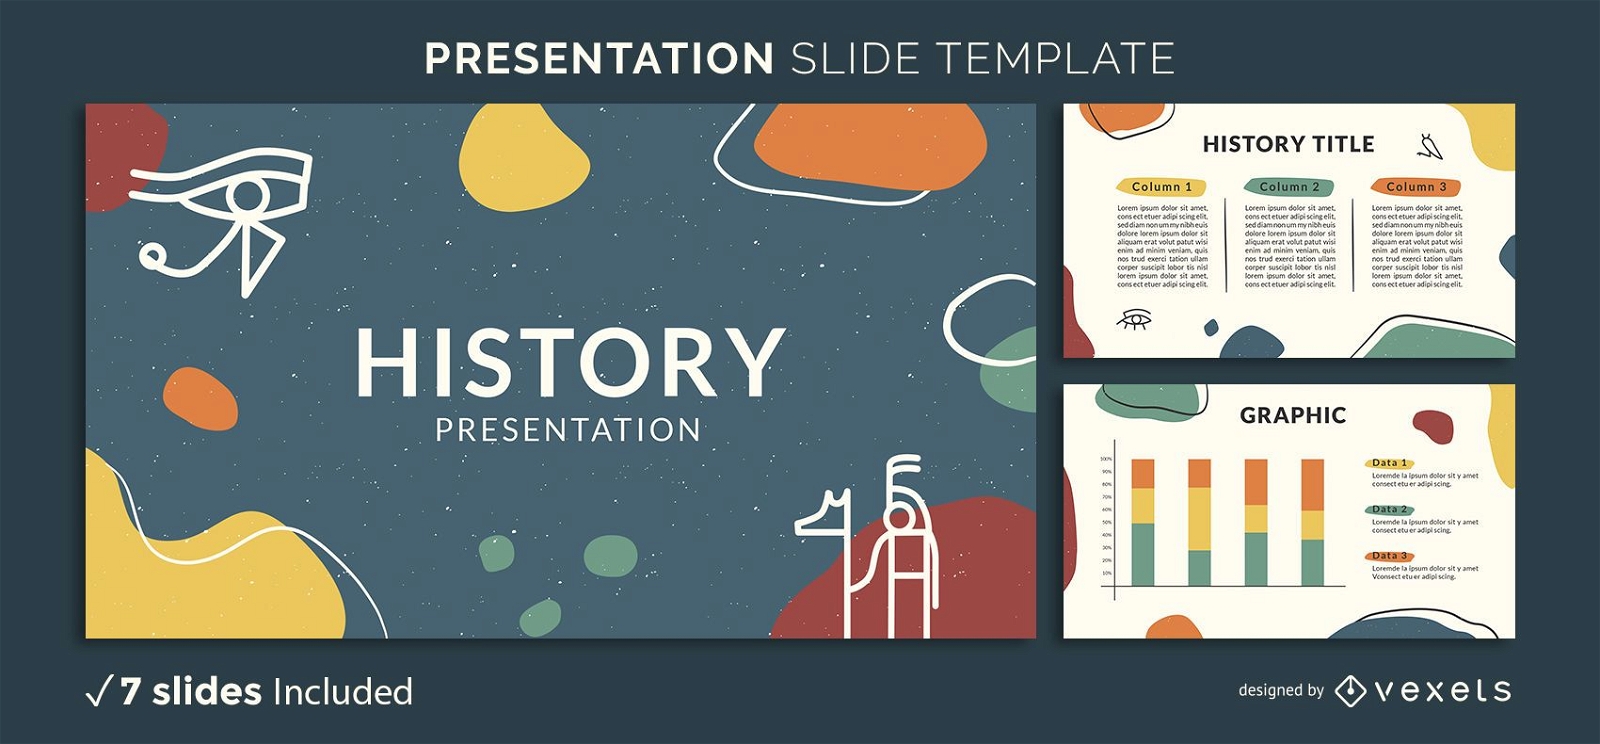 History Slides Template